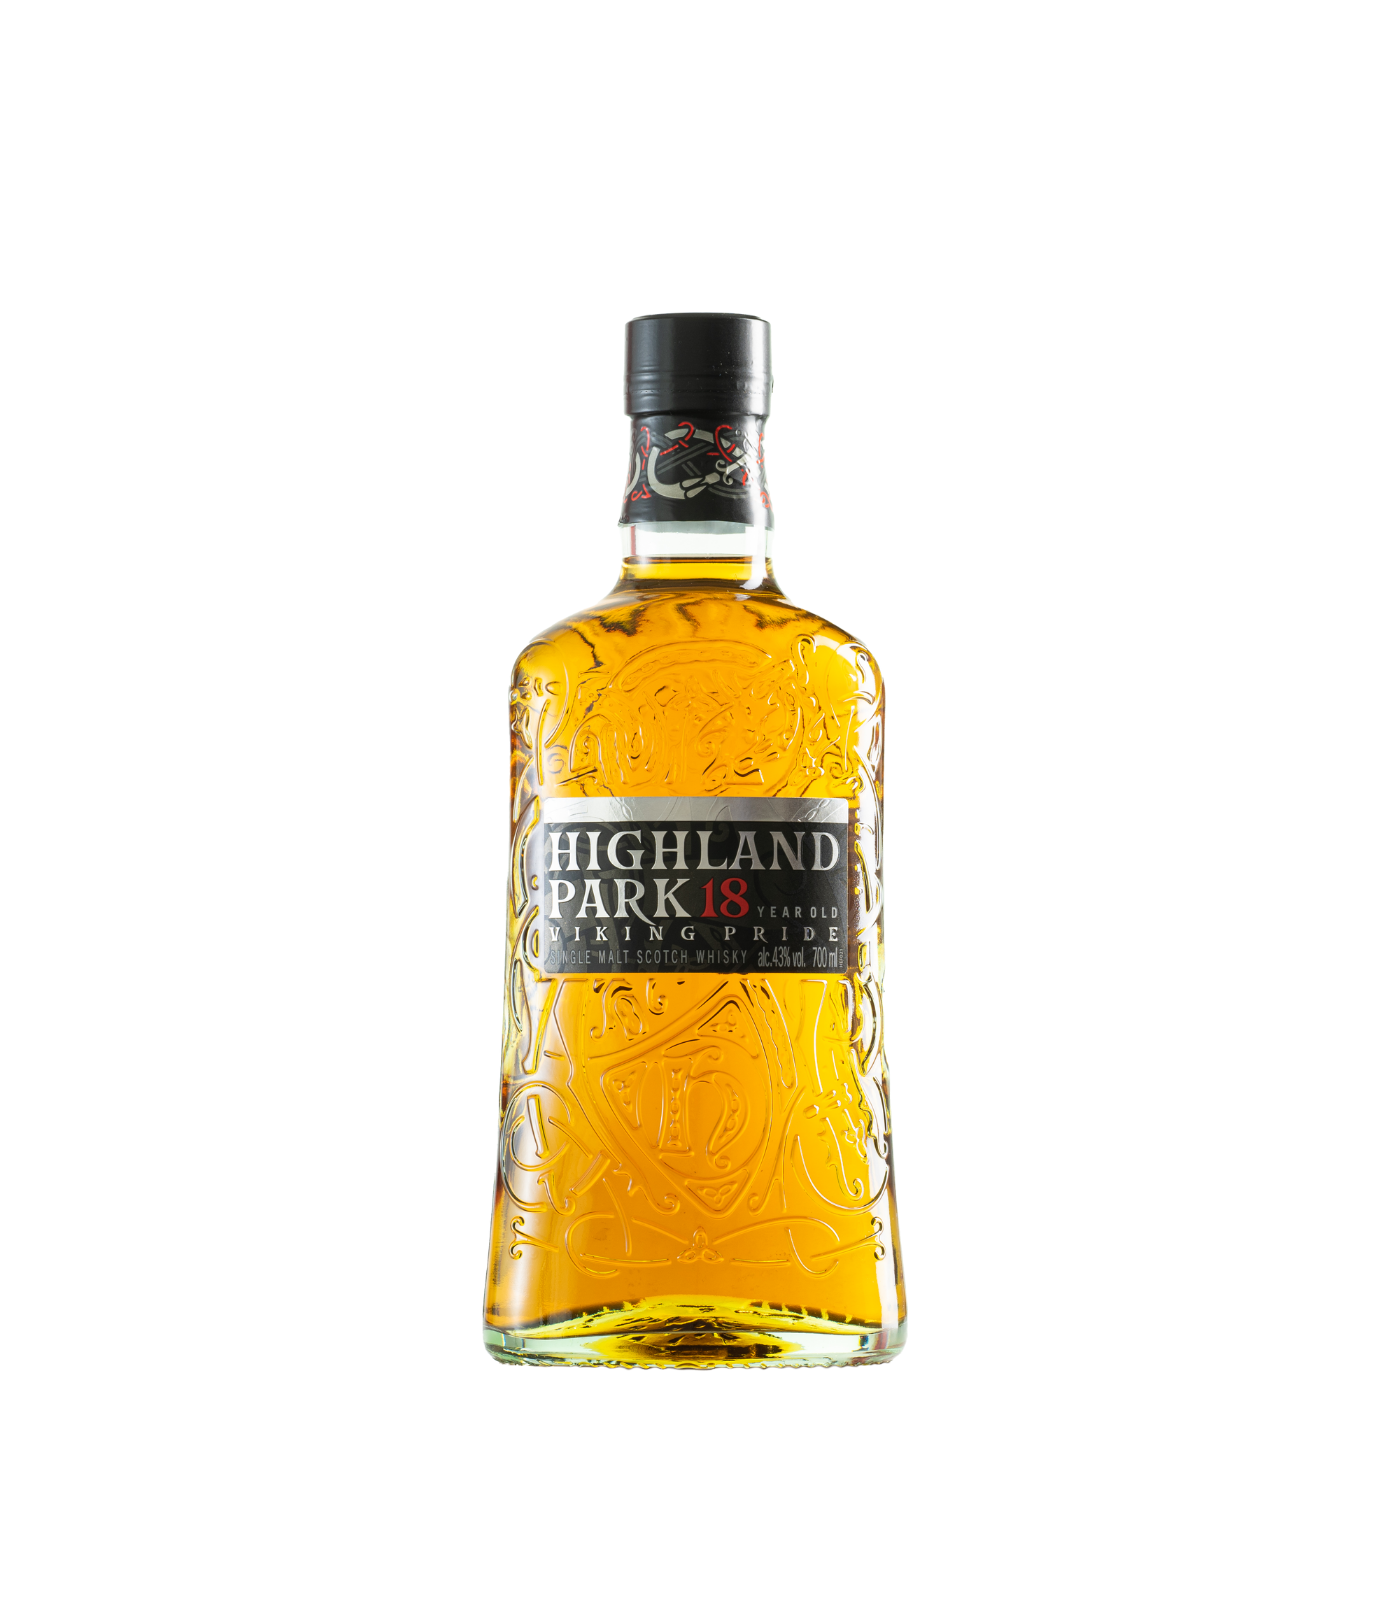 Highland Park 18 Year Old Whisky - Viking Pride ( 70cl; 43%)